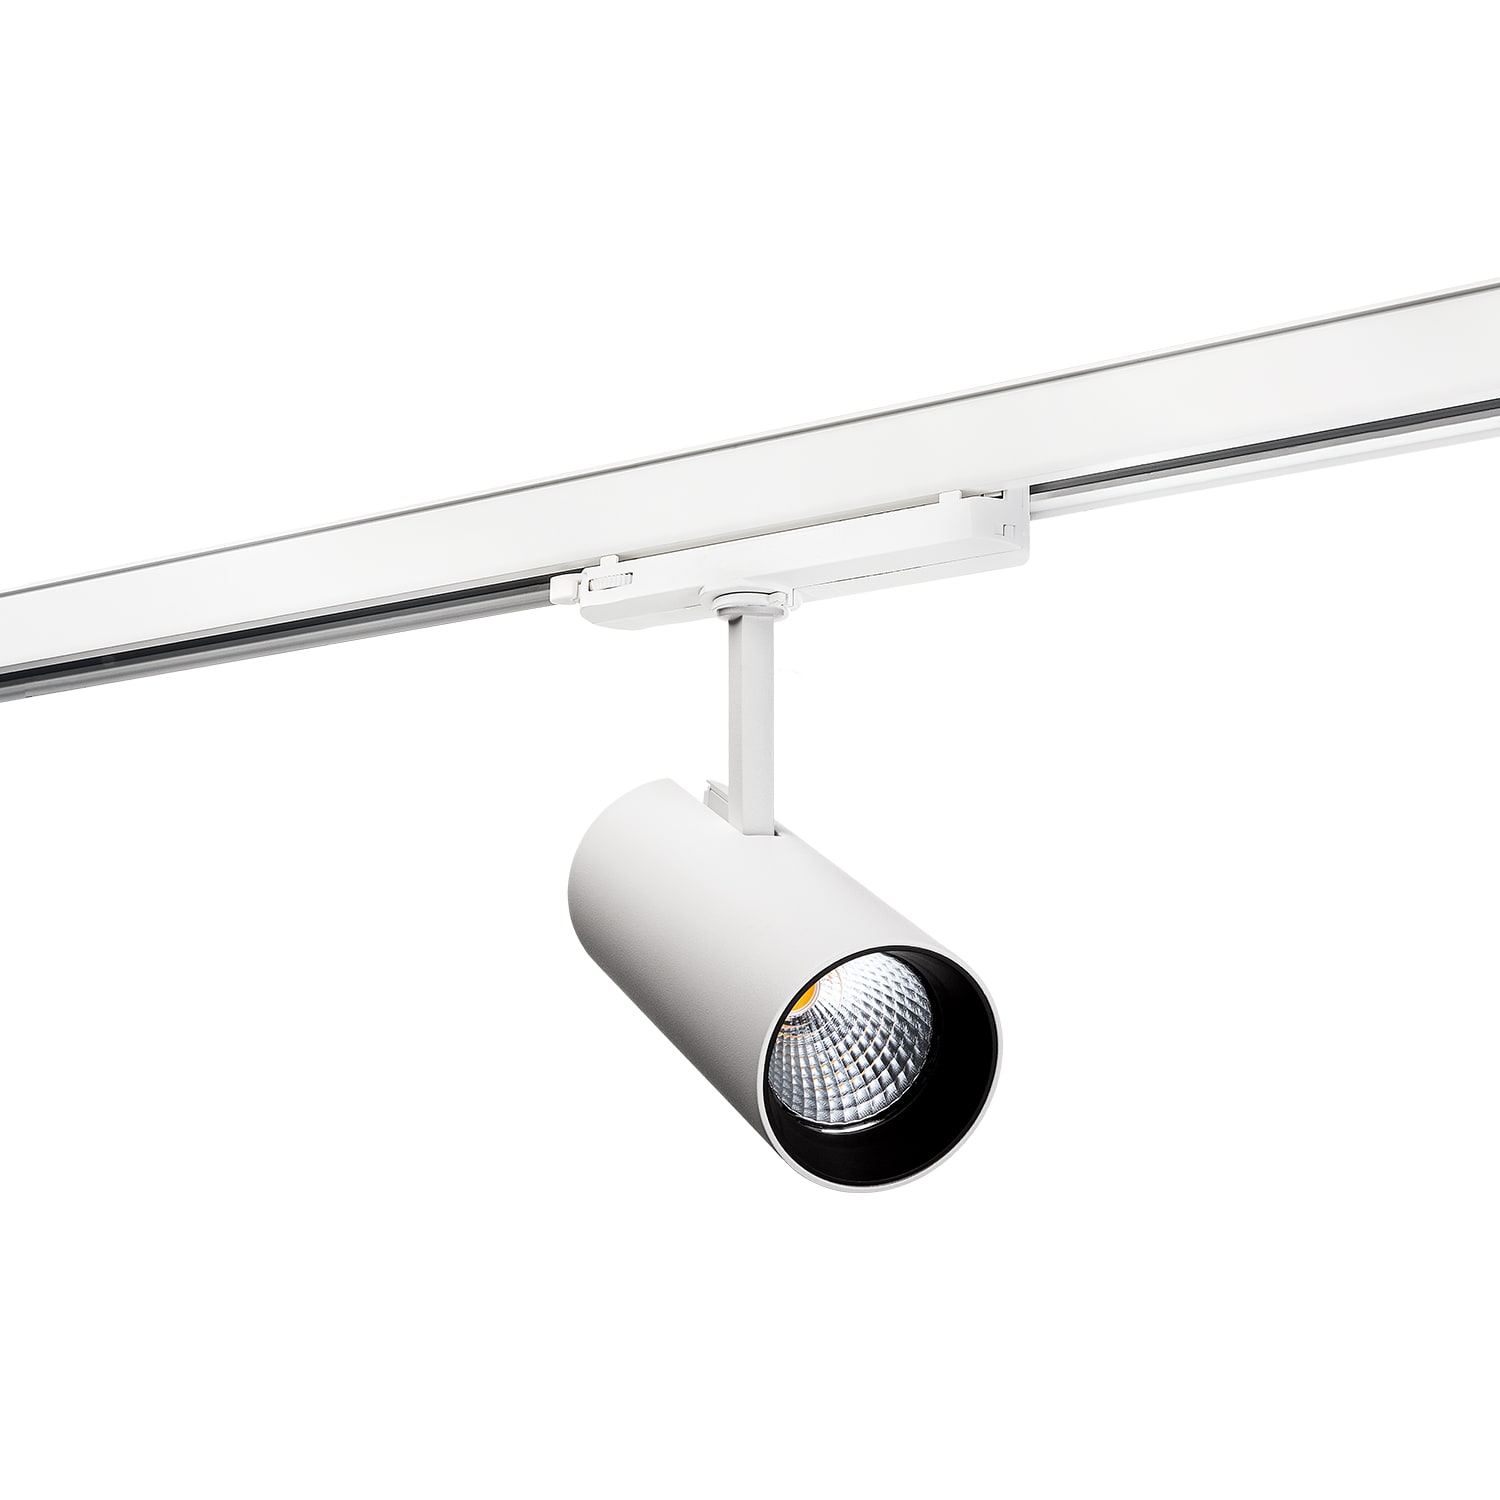 SG Lighting - Tube Pro 3 allumages blanc 3620lm 3000K Ra>90 non dimmable